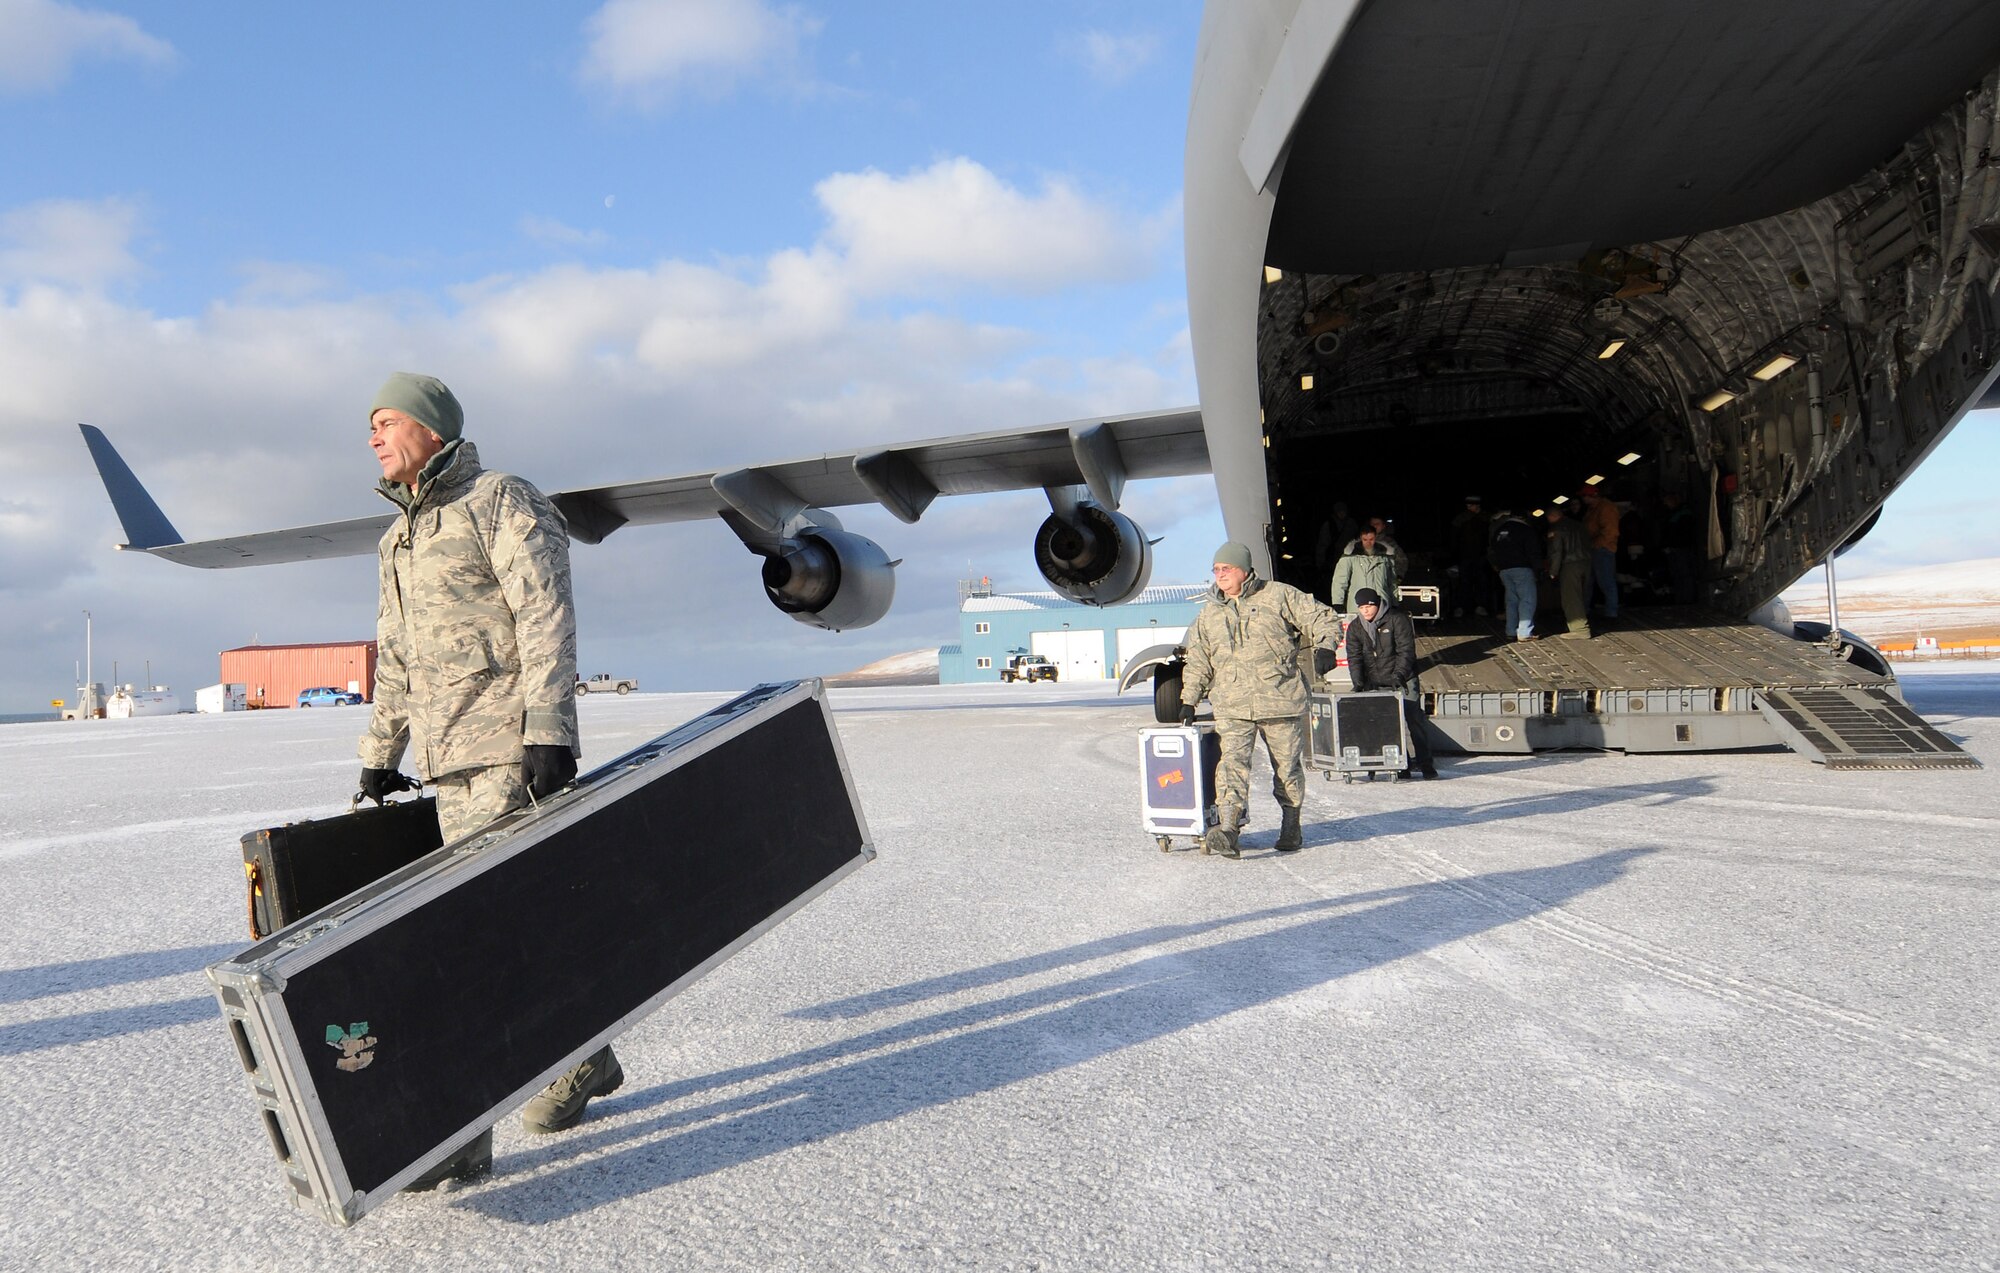 MSgt. Ron Larsen, a pianist with the Elmendorf-based Air Force Band of the Pacific, hauls gear off the C-17 that transported the band members and Operation Santa Claus volunteers to St. George. Assisting him as roadie is Lt. Col. Richard Cavens, wing chaplain for the Alaska Air National Guard's 176th Wing. U.S. Air Force photo by 1st Lt. John Callahan.